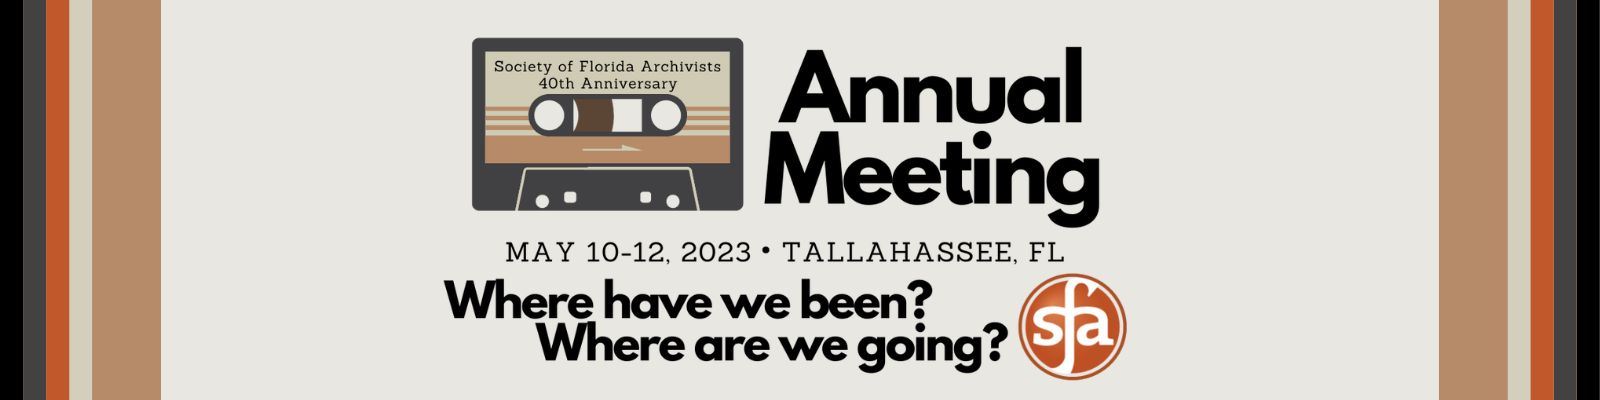 Society of Florida Archivists 40th Anniversary Annual Meeting - May 10-12, 2023 - Tallahassee, FL - Where have we been? Where are we going?